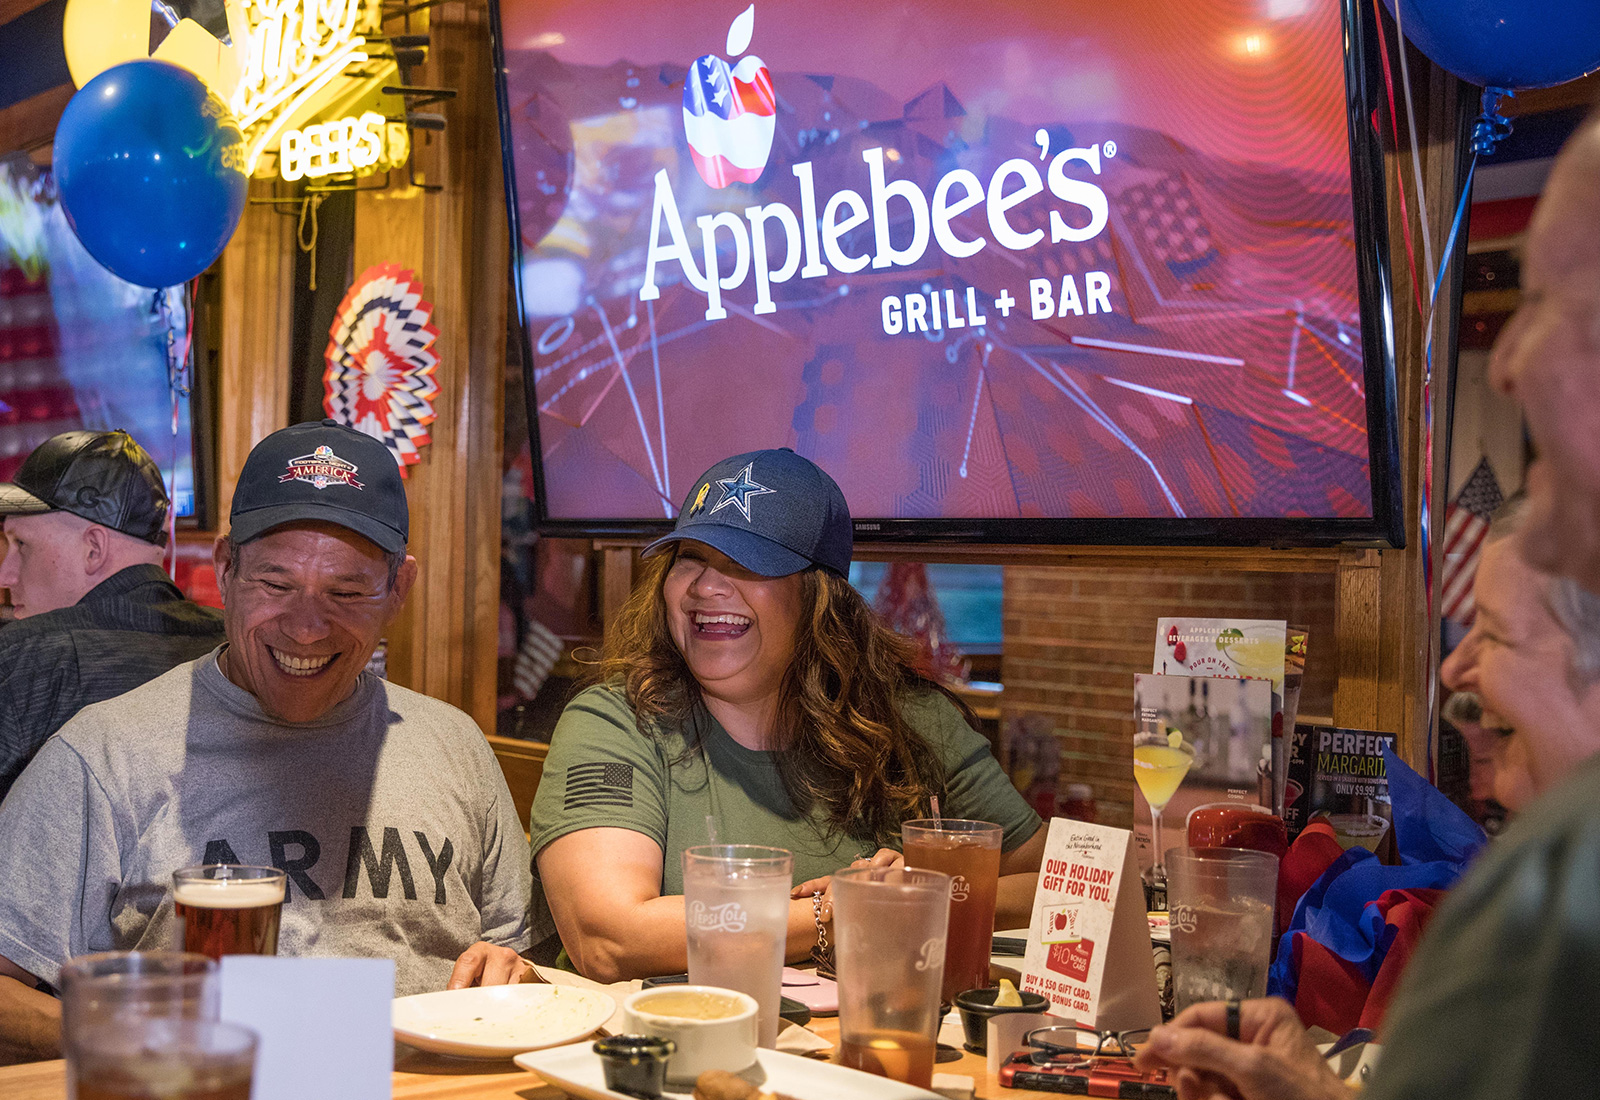 over-60-veterans-day-free-meals-and-deals-at-starbucks-applebee-s-and